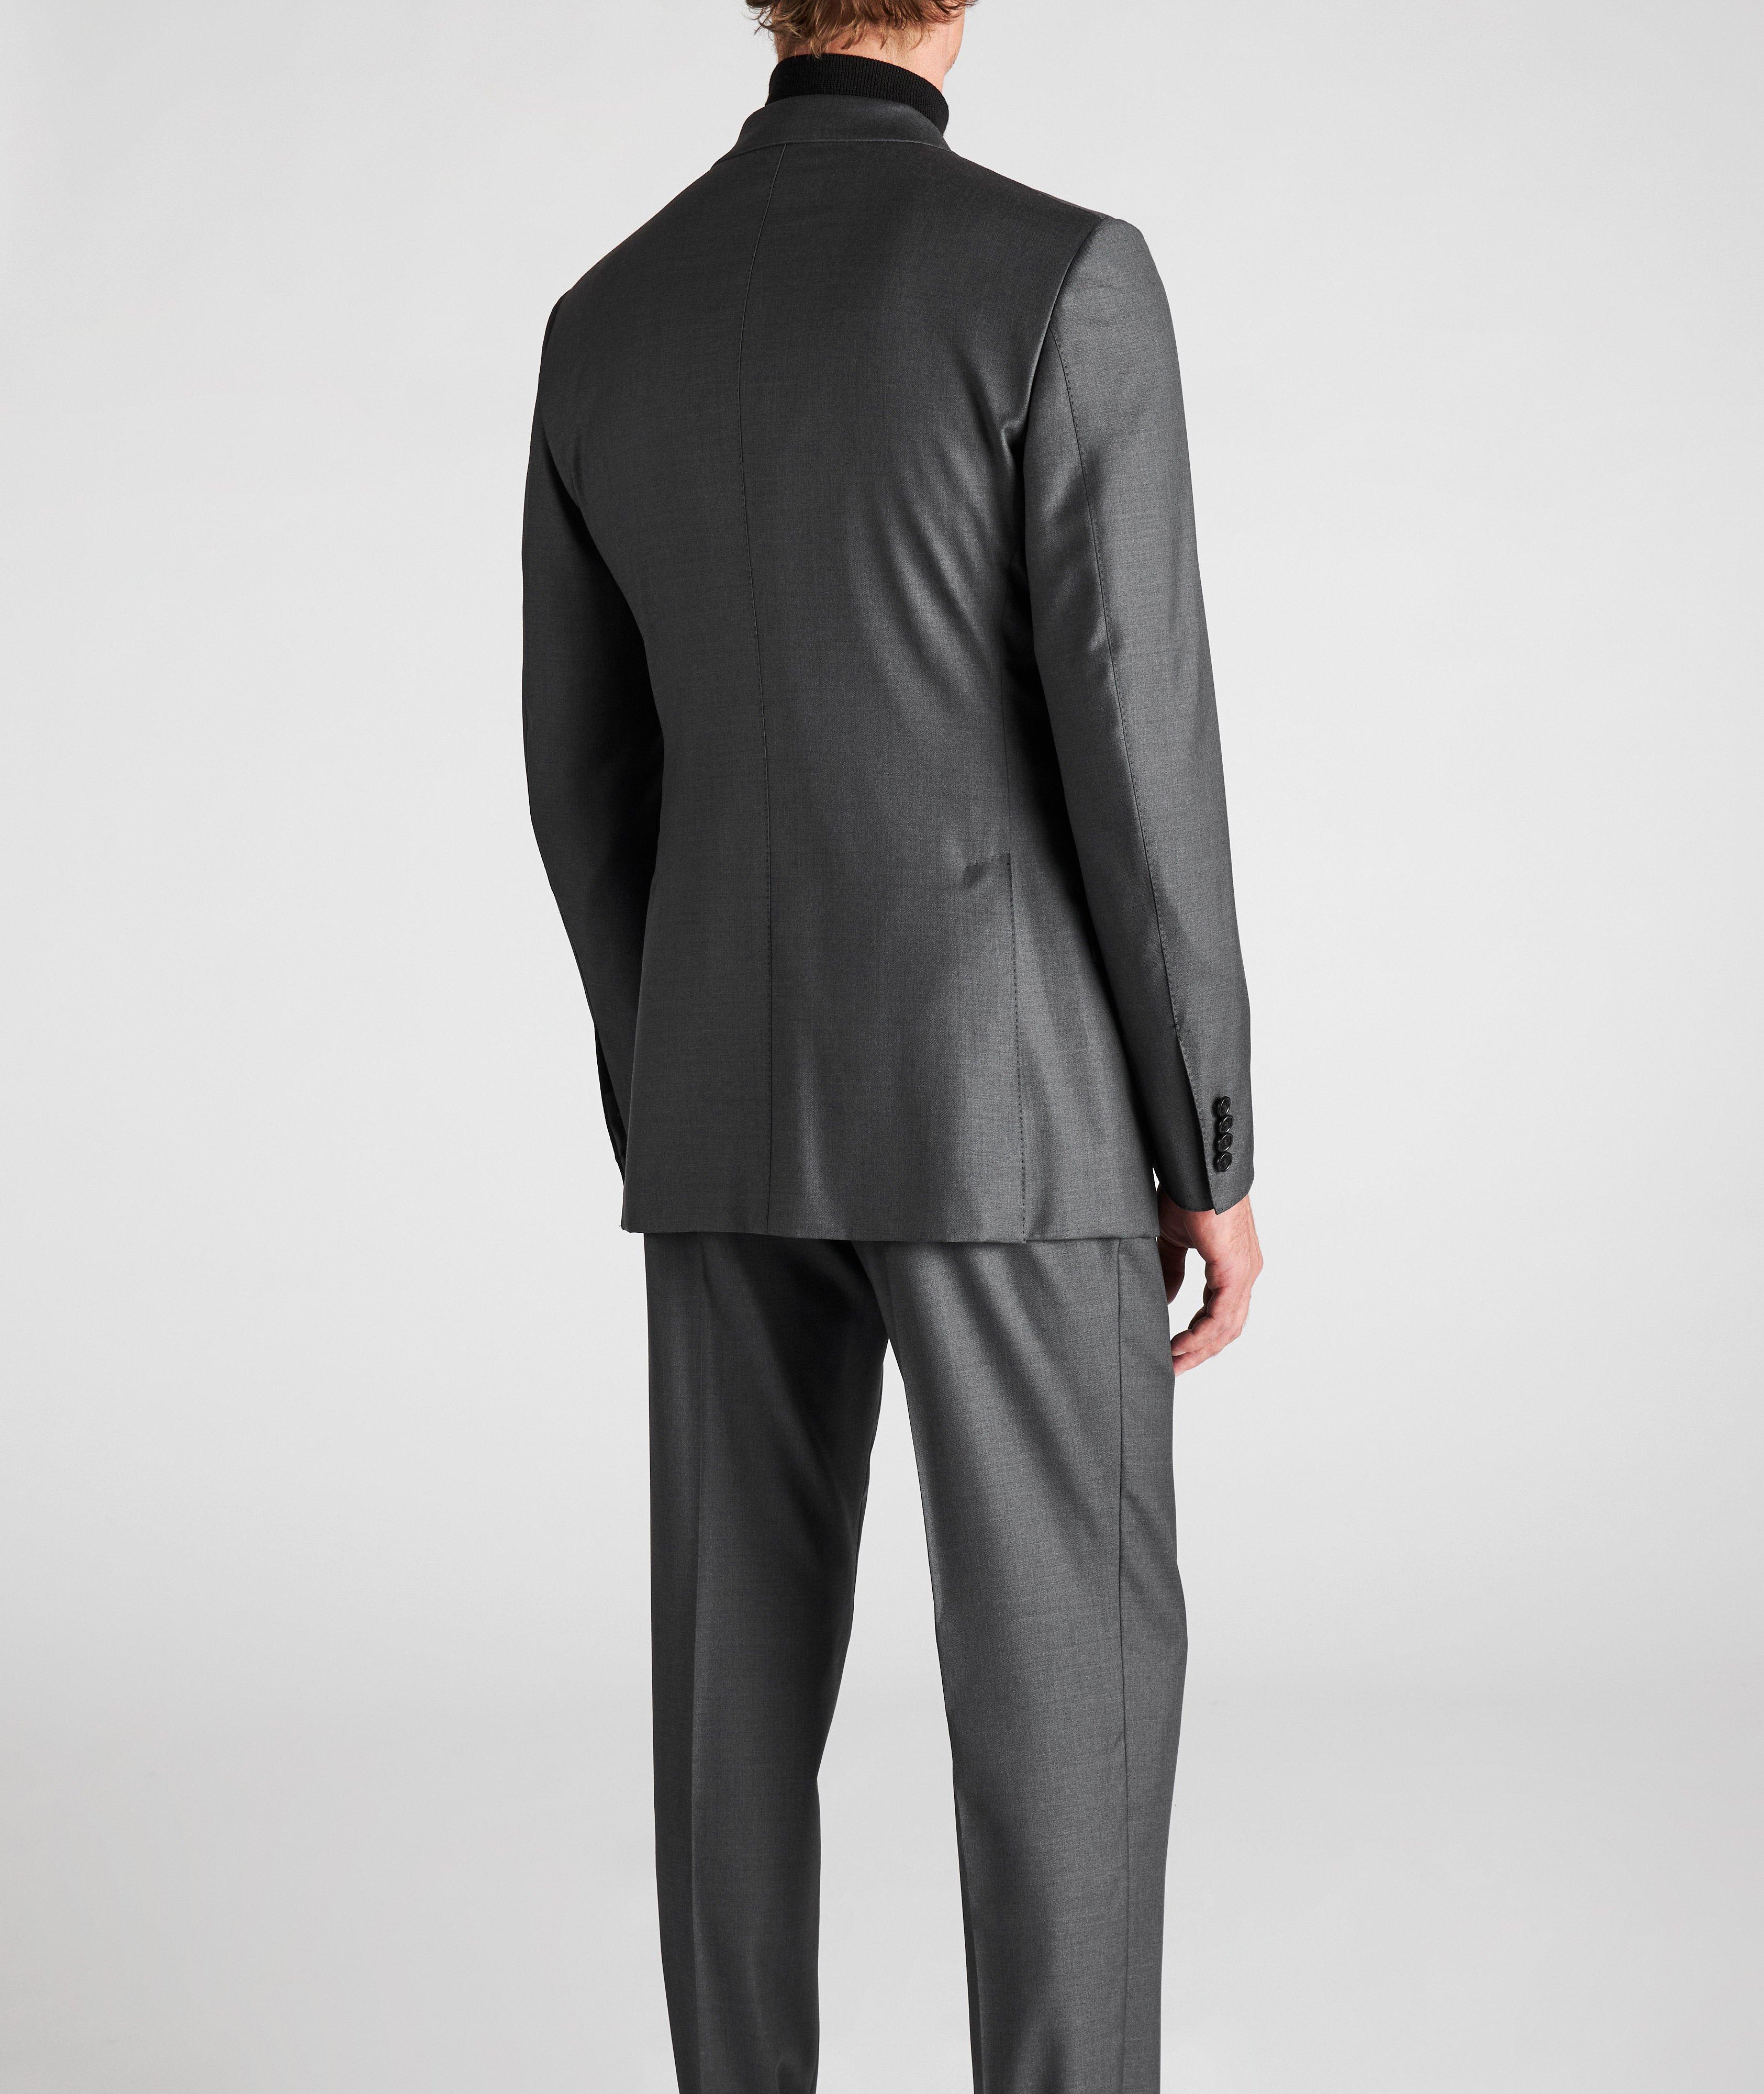 O'Connor Solid Wool Suit image 2